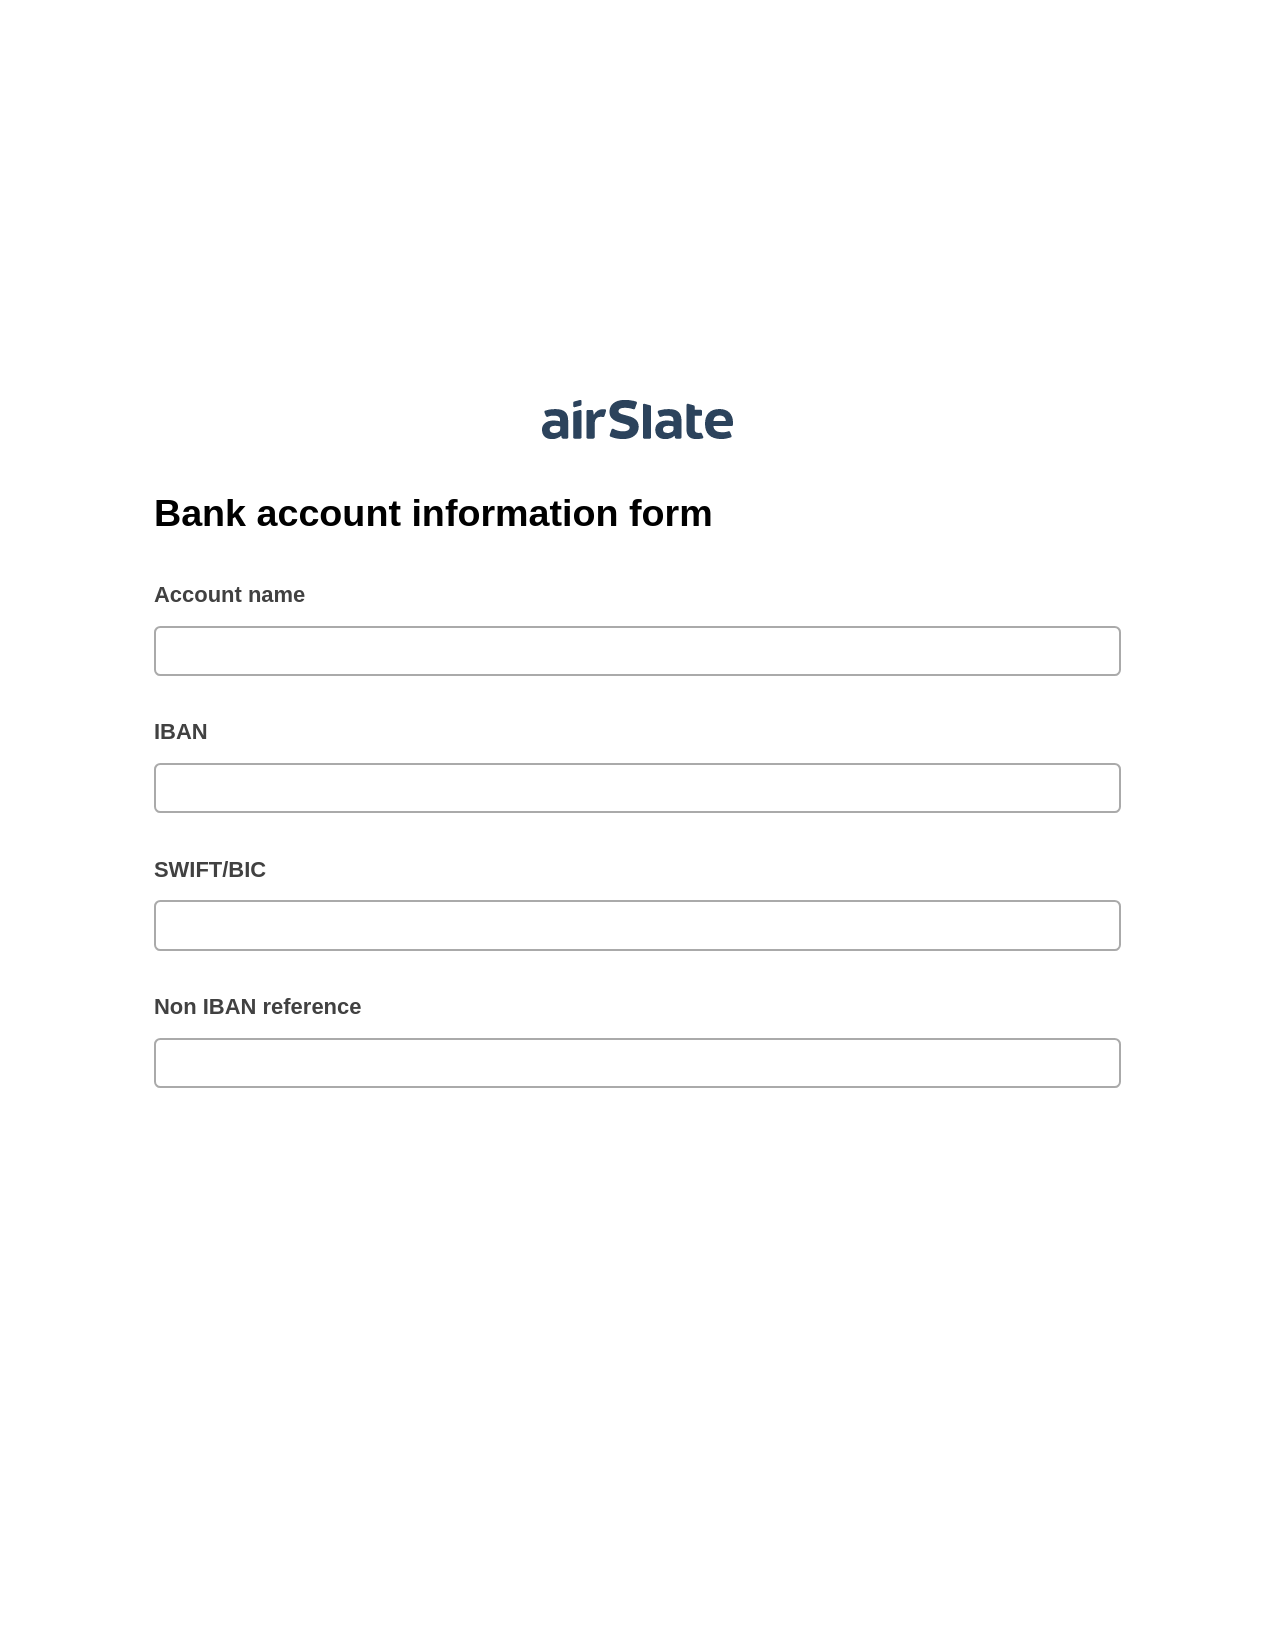 Multirole Bank account information form Pre-fill Slate from MS Dynamics 365 Records Bot, Create NetSuite Records Bot, Dropbox Bot